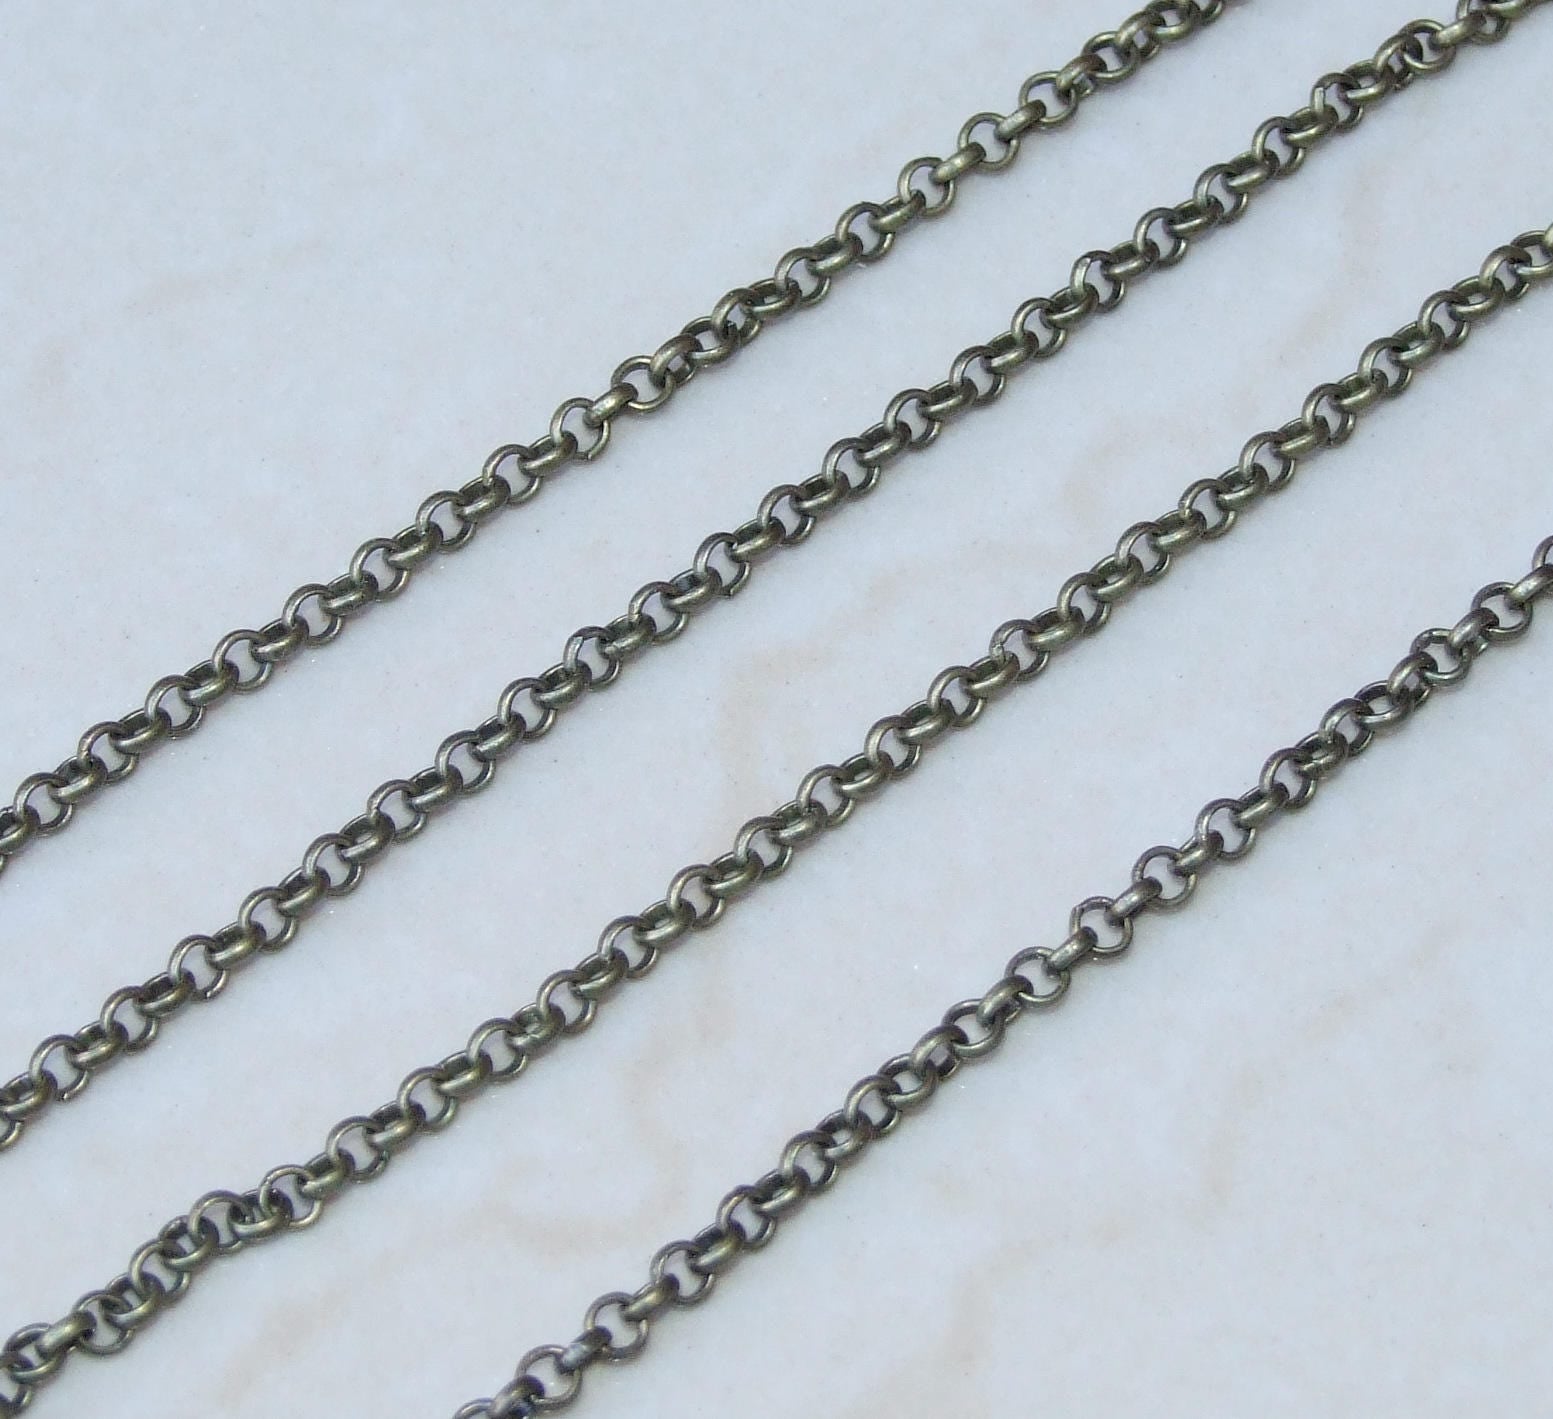 Twisted Oval Link Thin Curb Chain, Gold Plated, Brass Chain